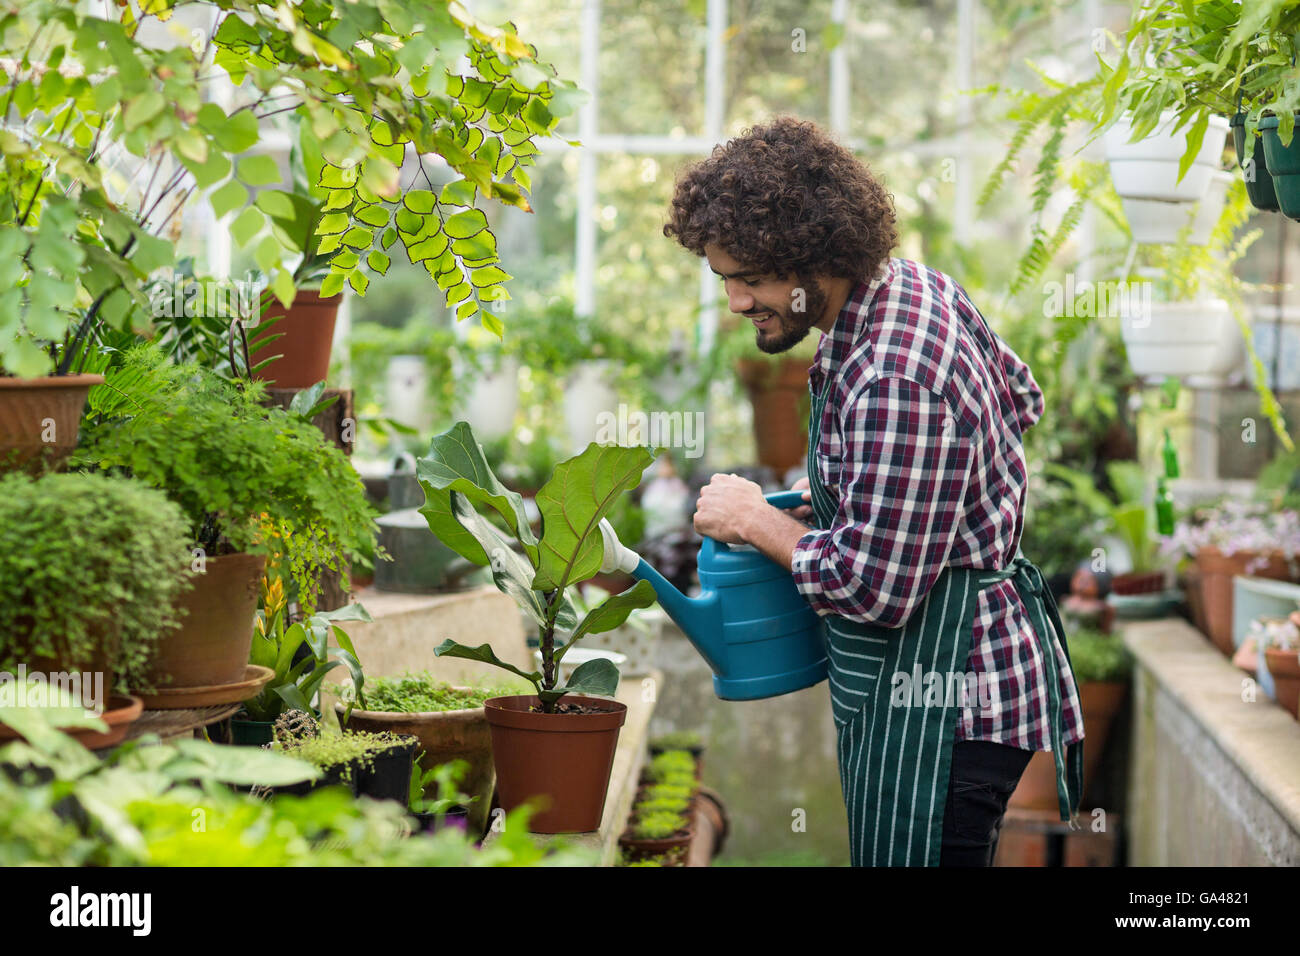 Male gardener watering plants at greenhouse Stock Photo